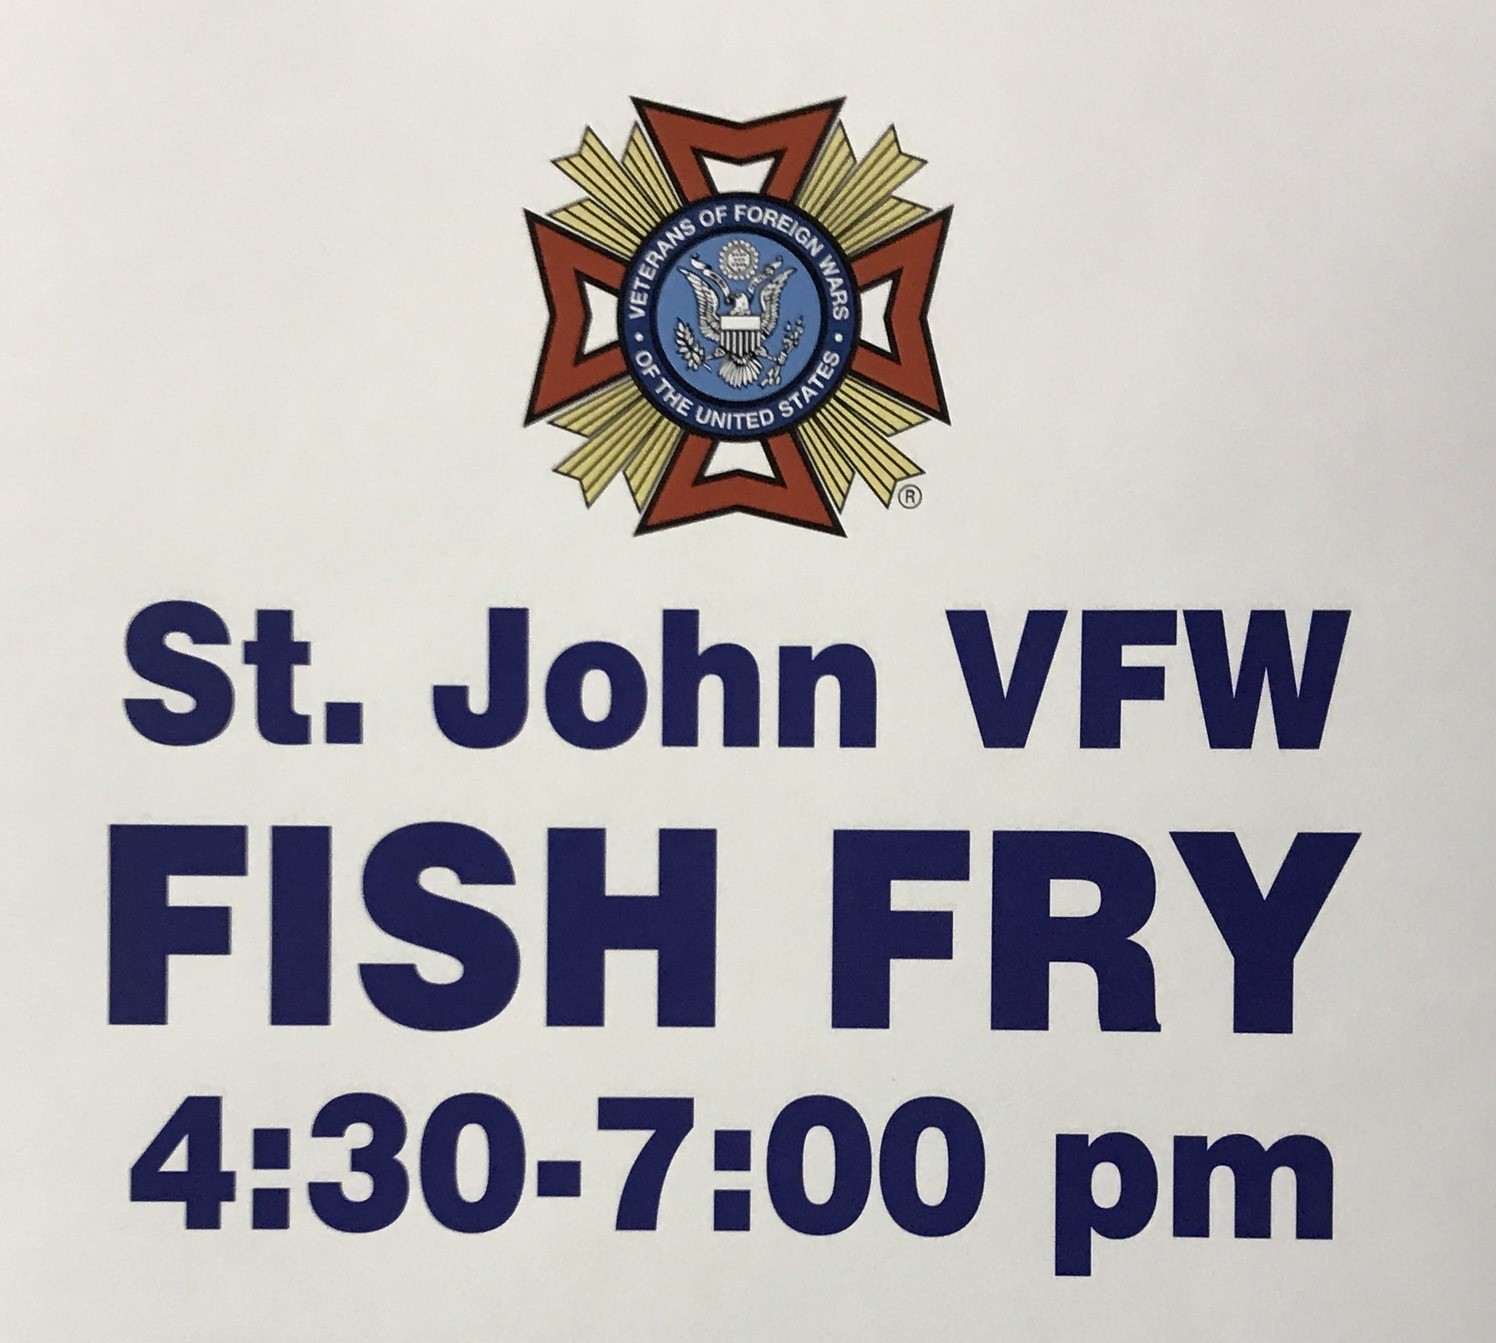 VFW Post 717 10400 W 93rd Ave, St John Indiana 46373